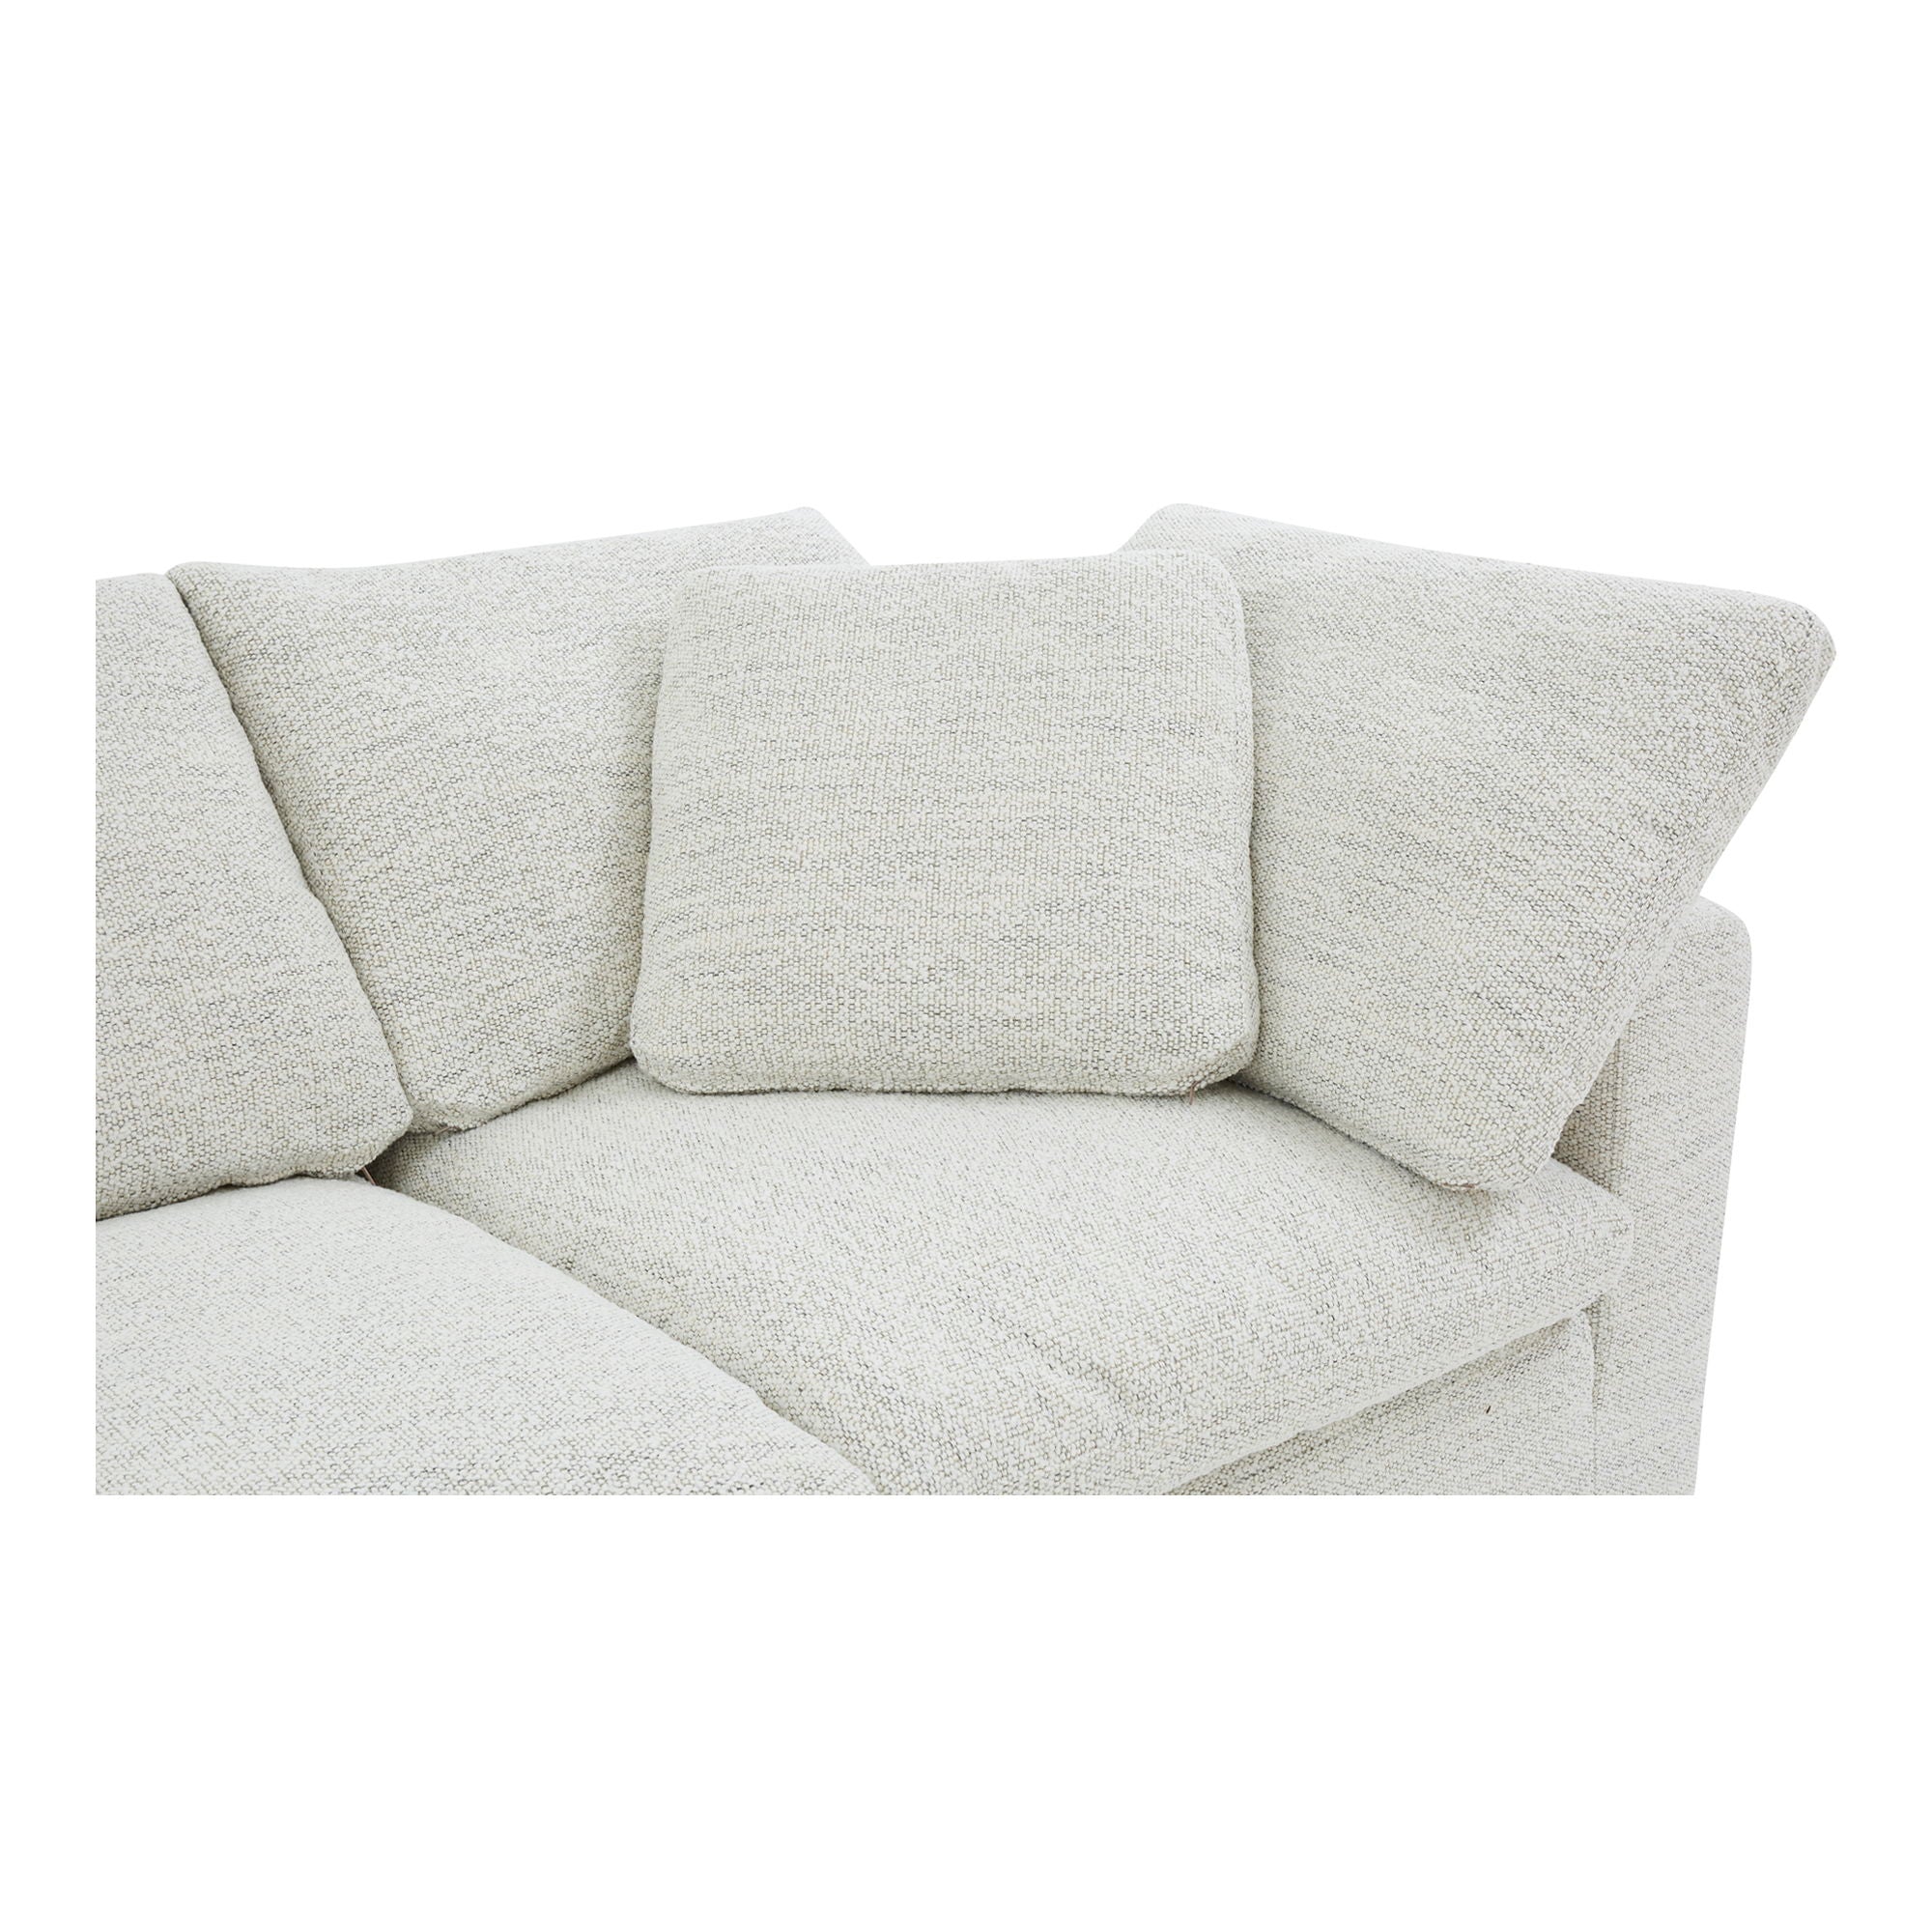 Terra - Modular Sofa Performance Fabric - Sand-Stationary Sectionals-American Furniture Outlet